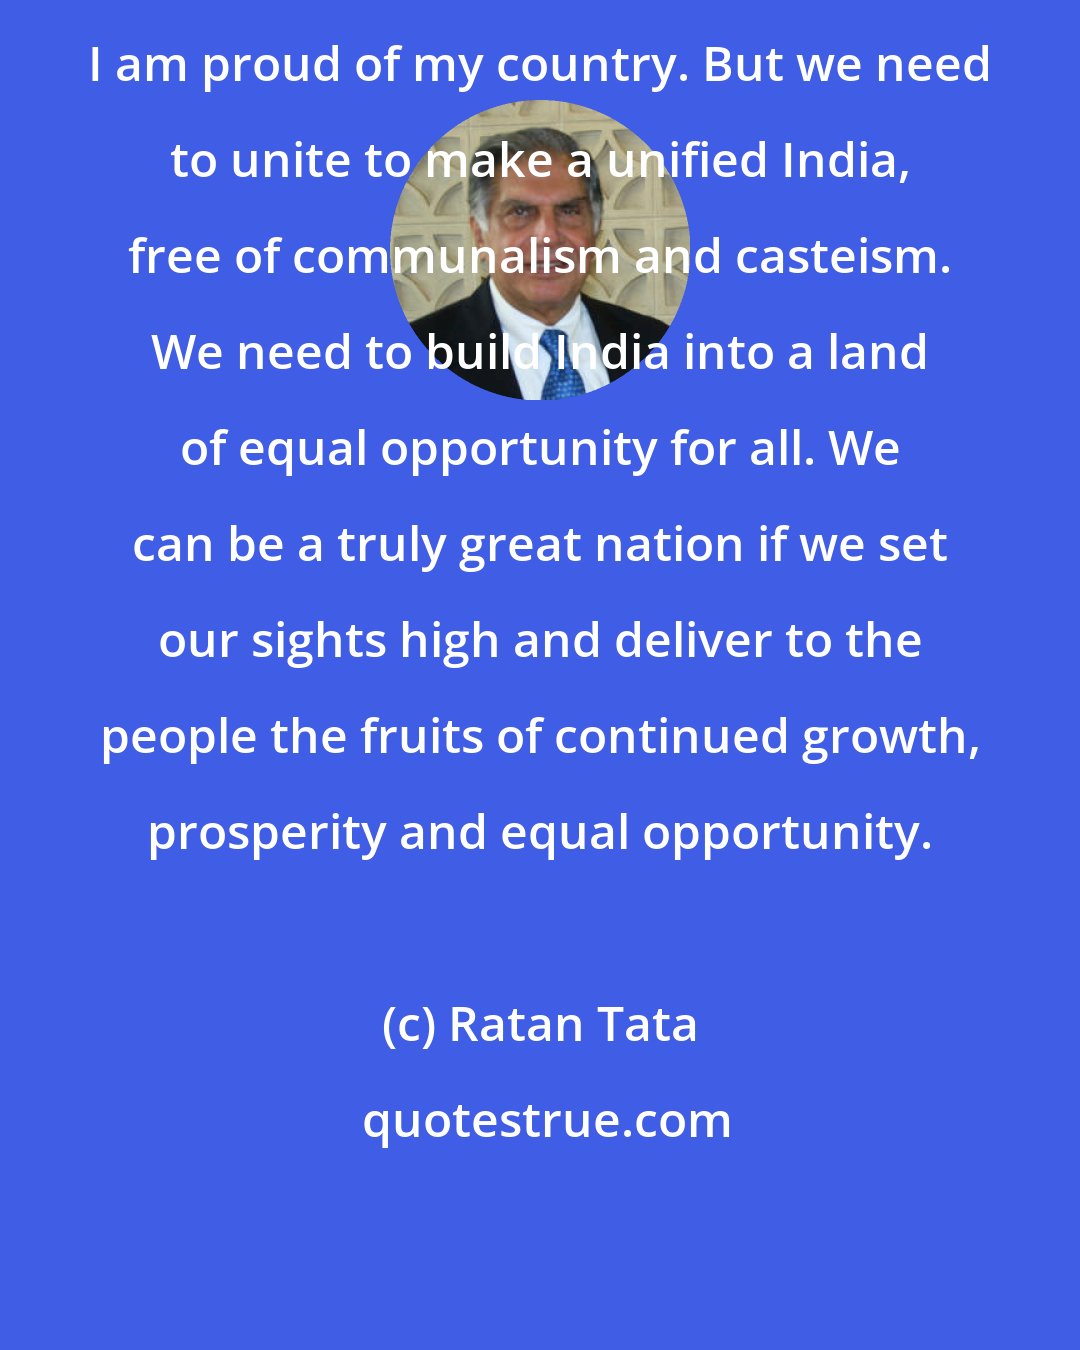 Ratan Tata: I am proud of my country. But we need to unite to make a unified India, free of communalism and casteism. We need to build India into a land of equal opportunity for all. We can be a truly great nation if we set our sights high and deliver to the people the fruits of continued growth, prosperity and equal opportunity.